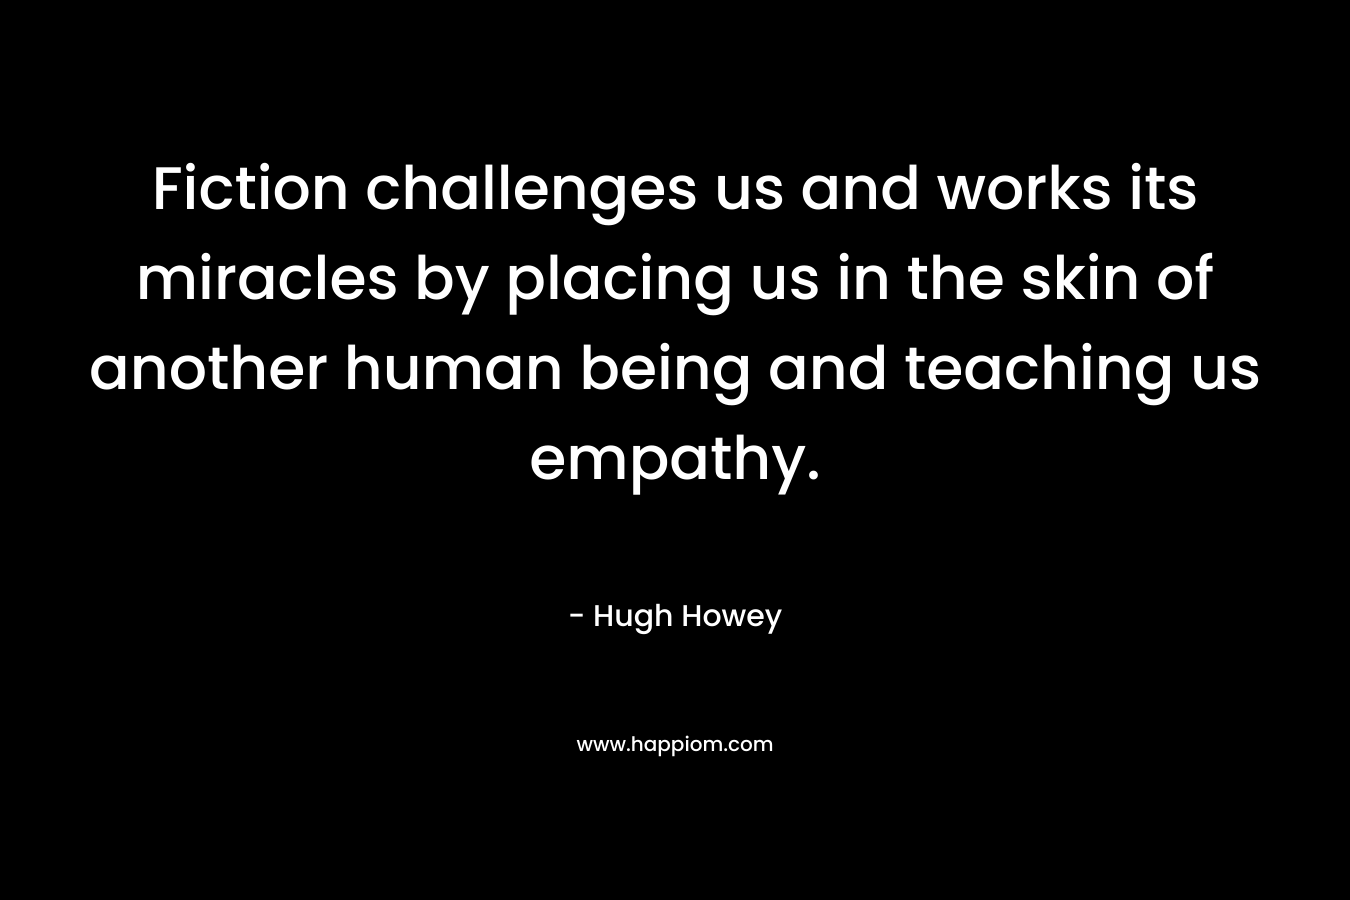 Fiction challenges us and works its miracles by placing us in the skin of another human being and teaching us empathy. – Hugh Howey